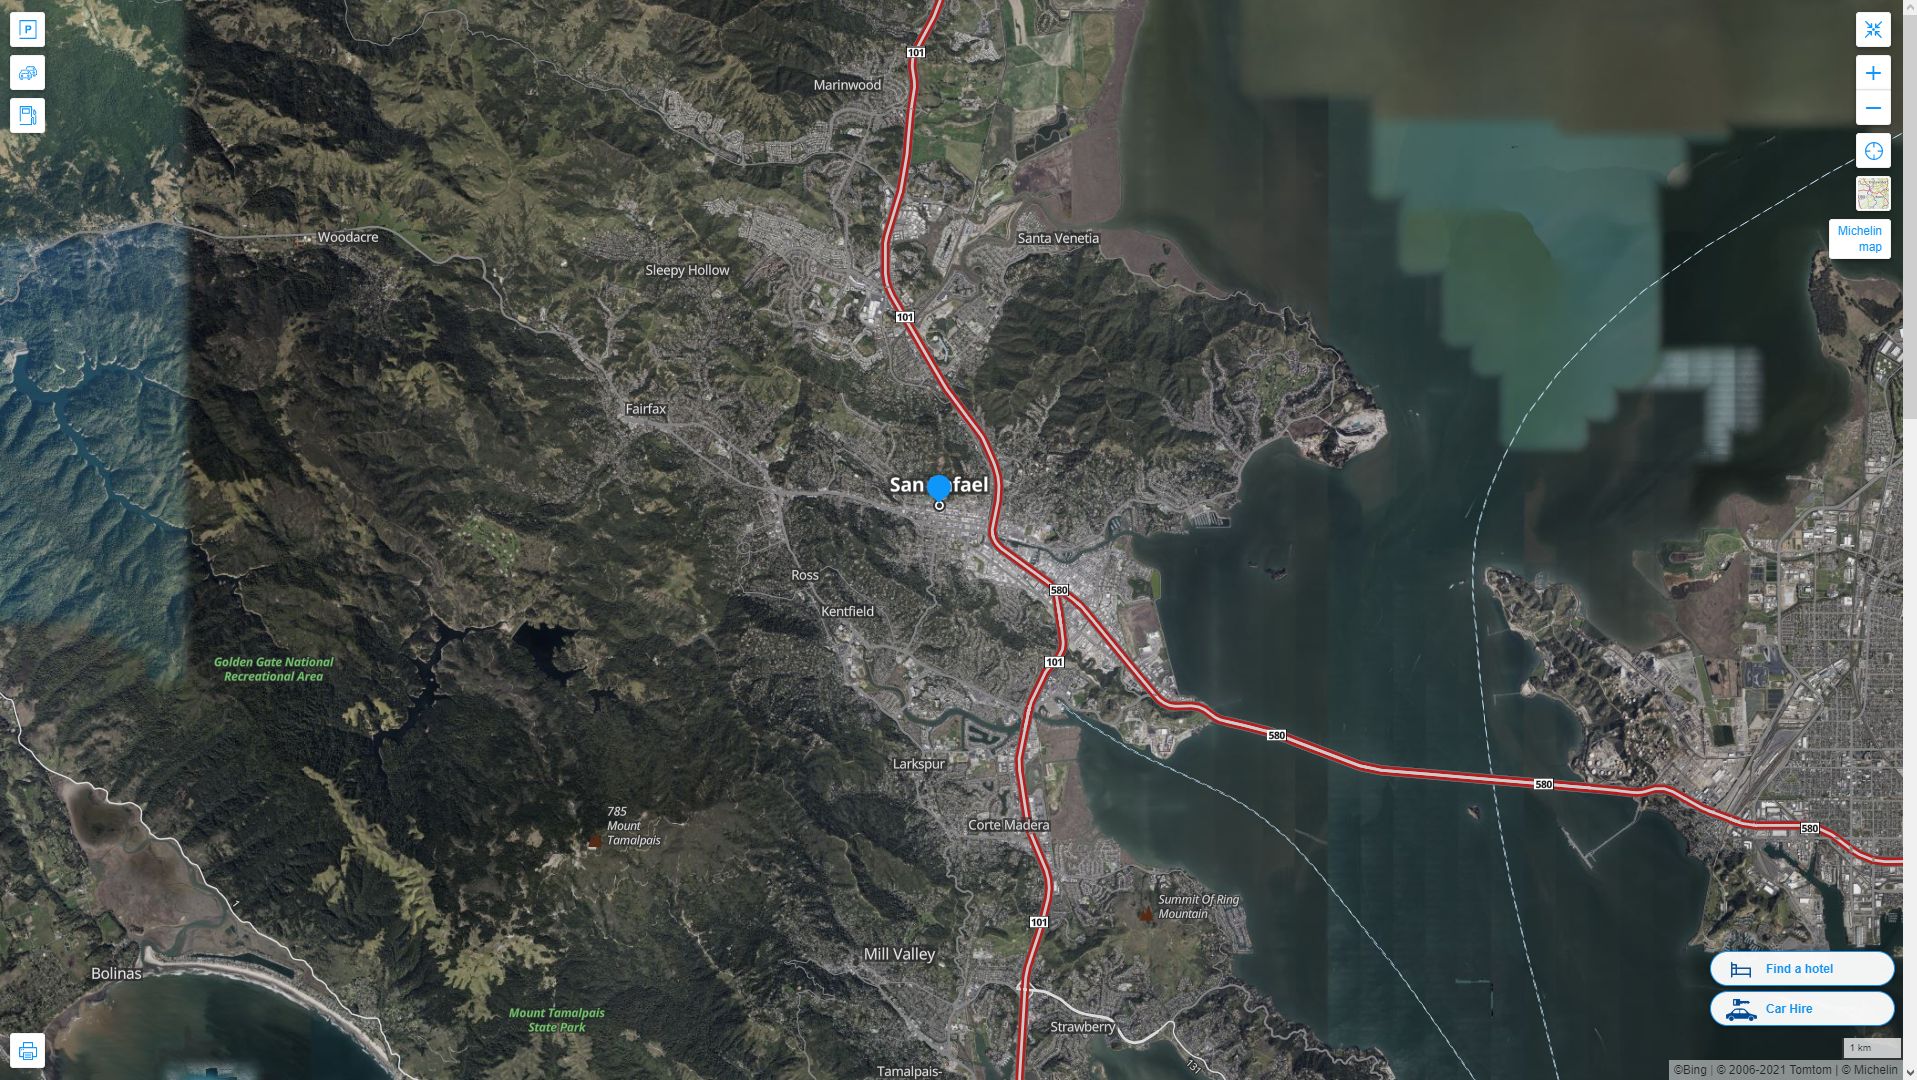 San Rafael California Highway and Road Map with Satellite View